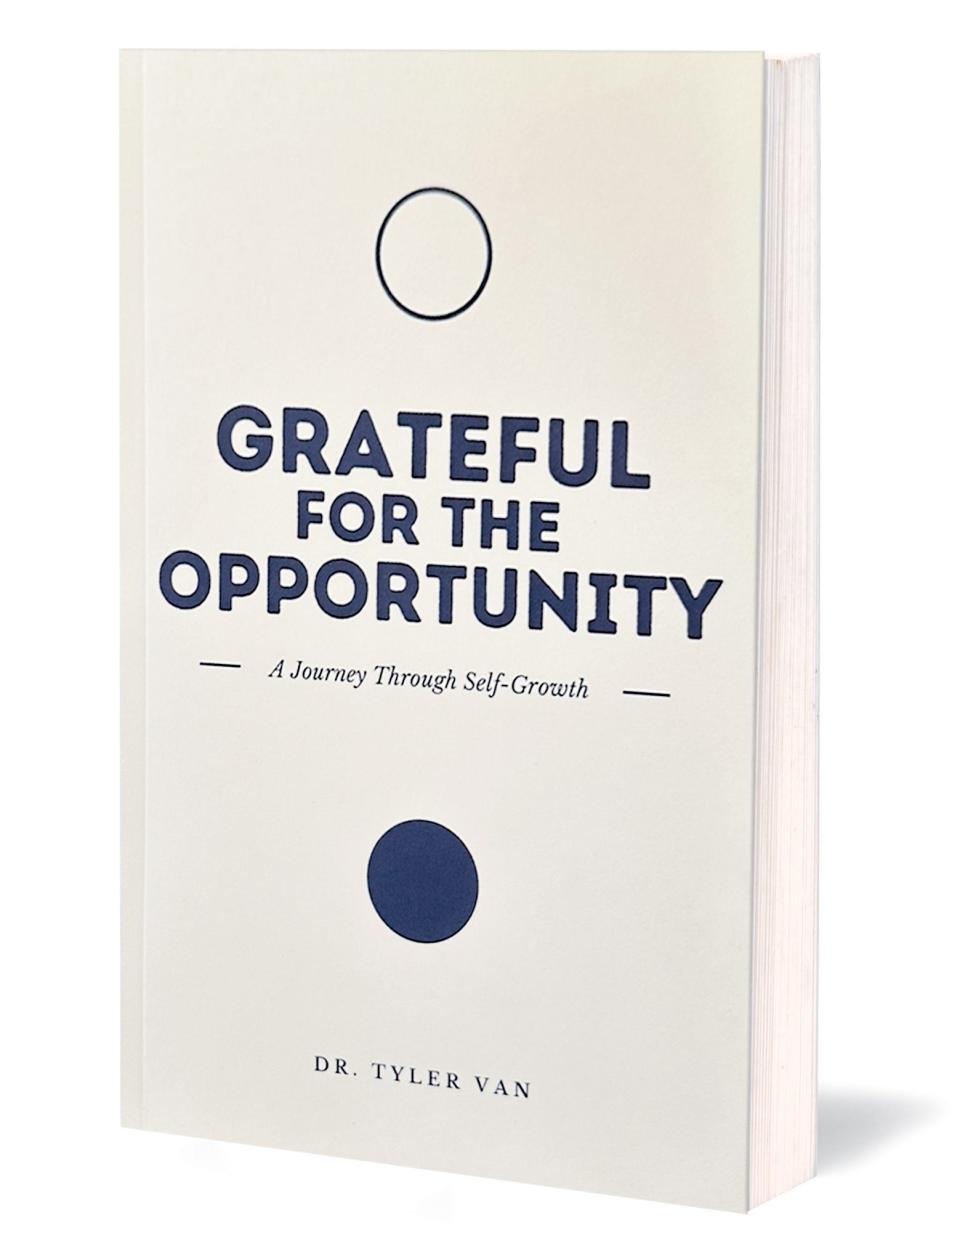 After being diagnosed with AFib, Dr. Van started a daily journal that he would eventually release as "Grateful for the Opportunity"